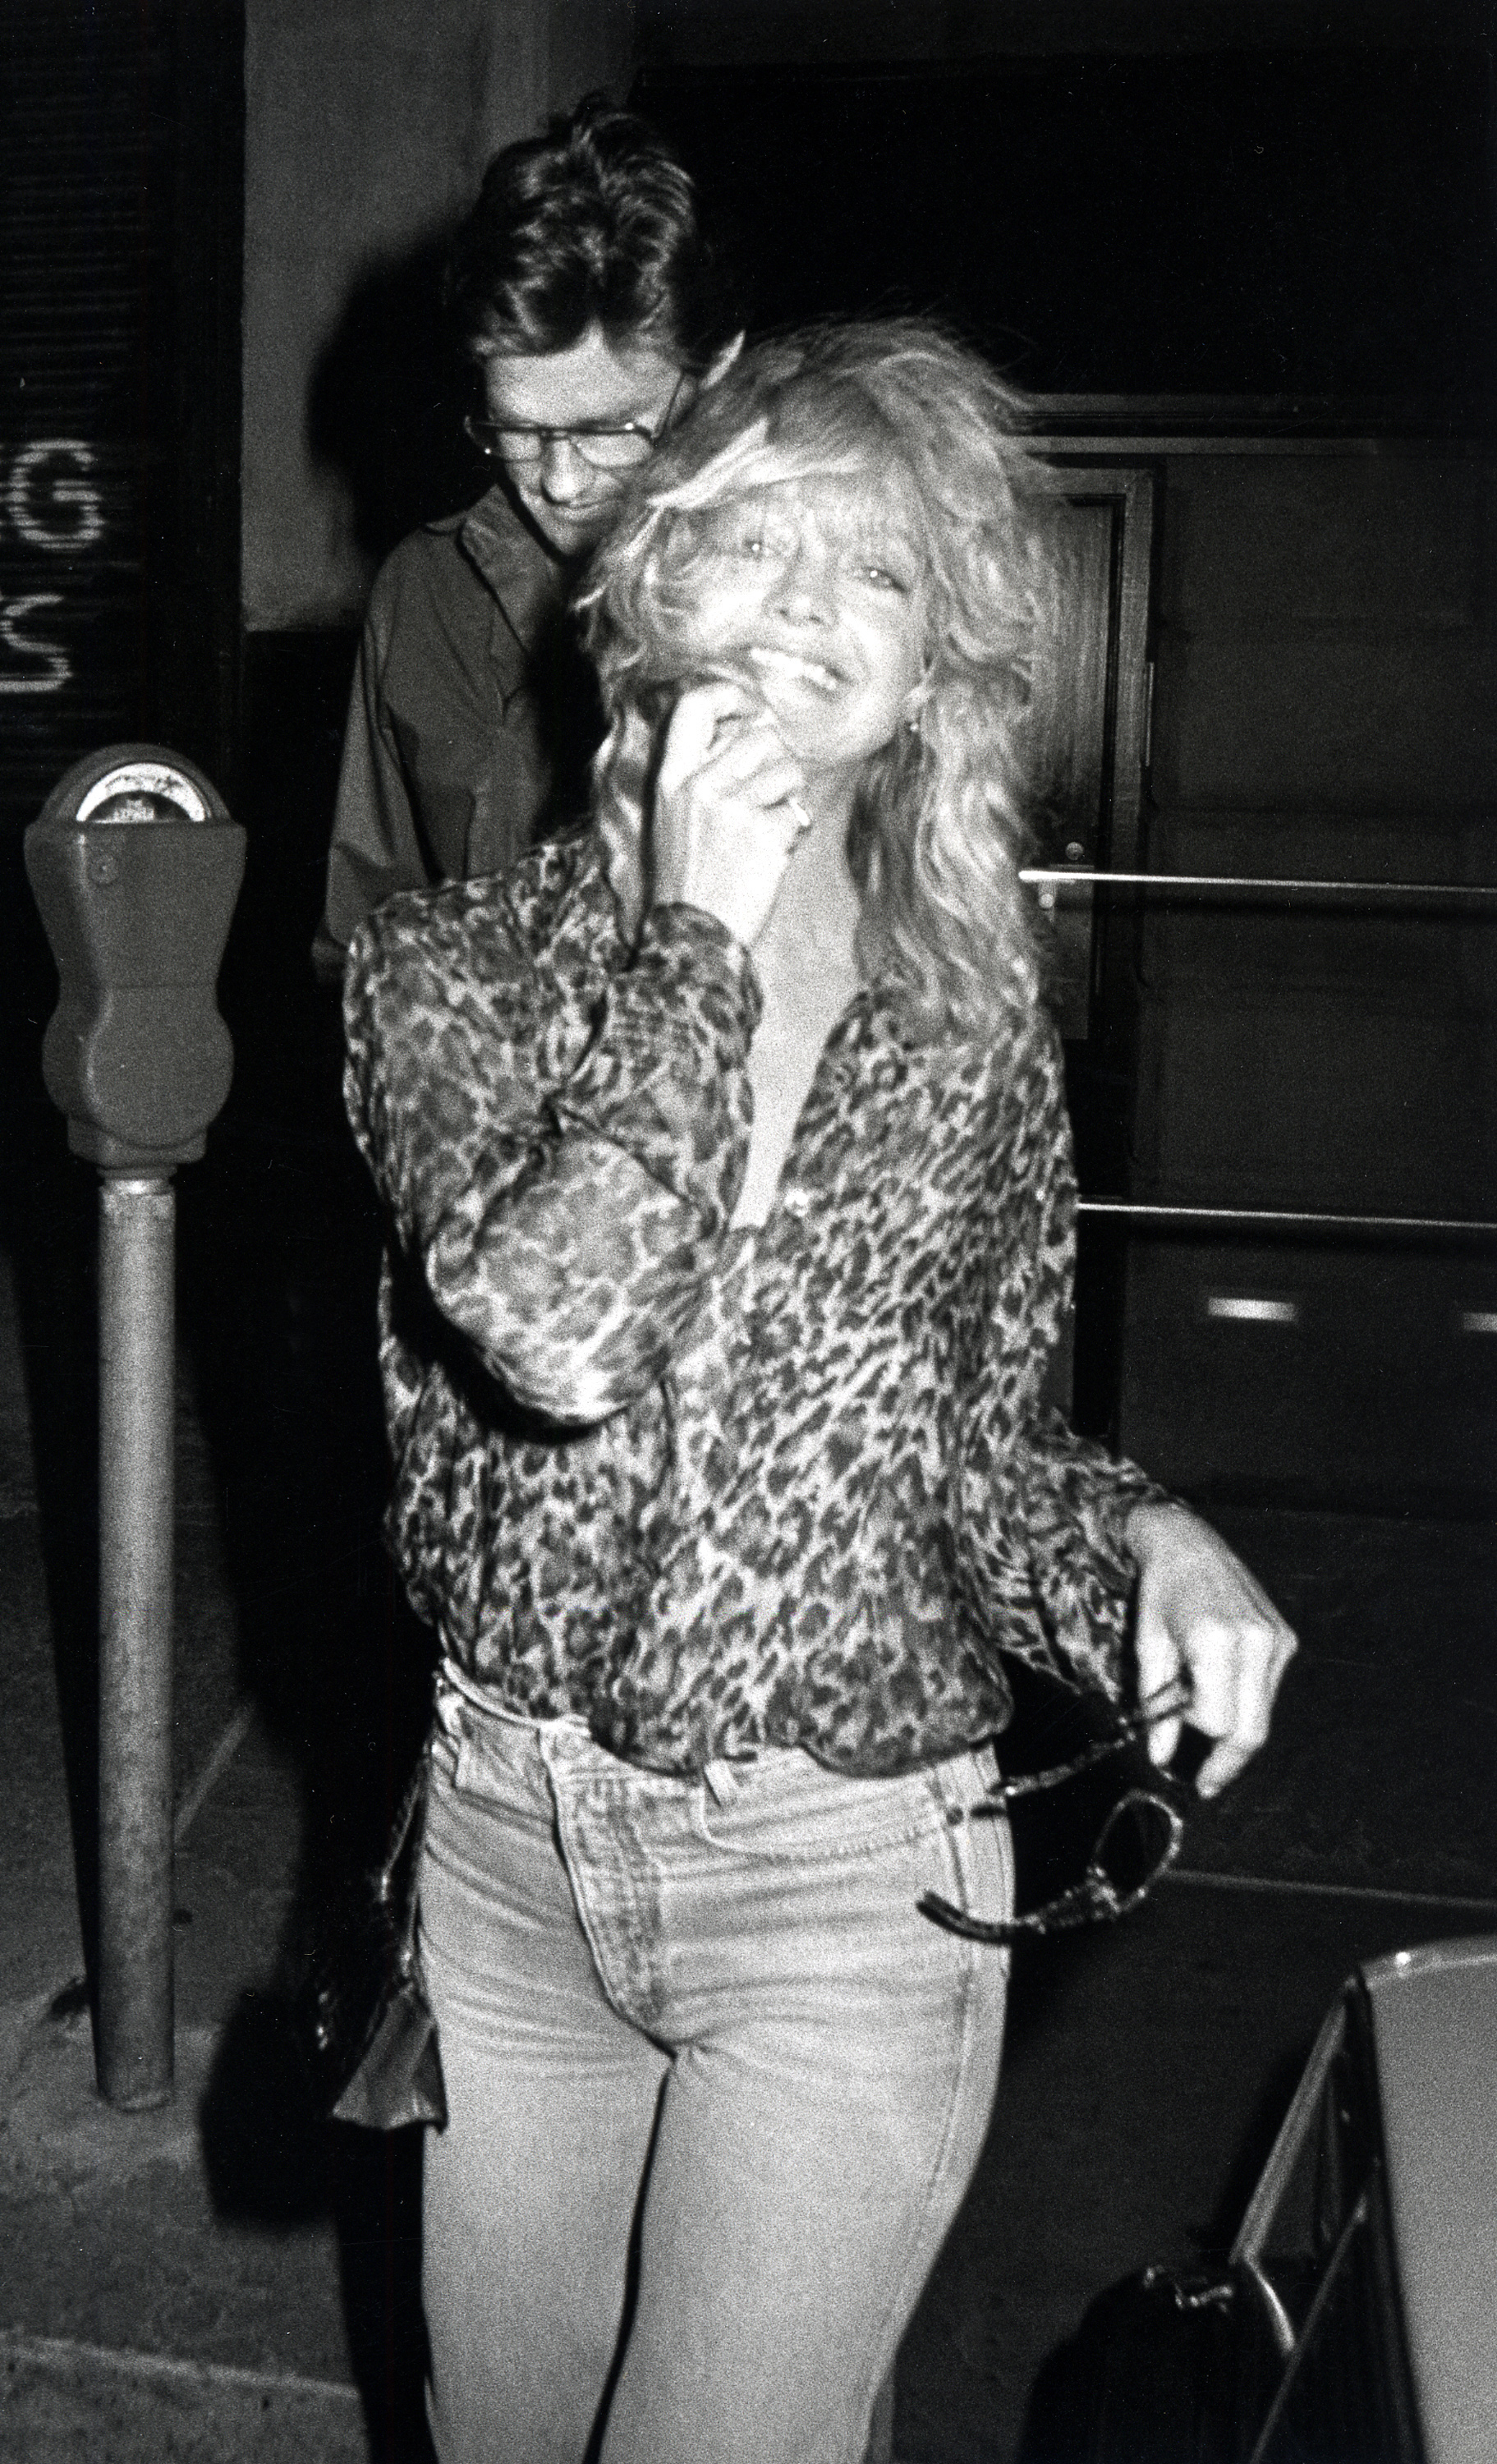 Kurt Russell and Goldie Hawn at Carlyle Hotel in 1983 | Source: Getty Images